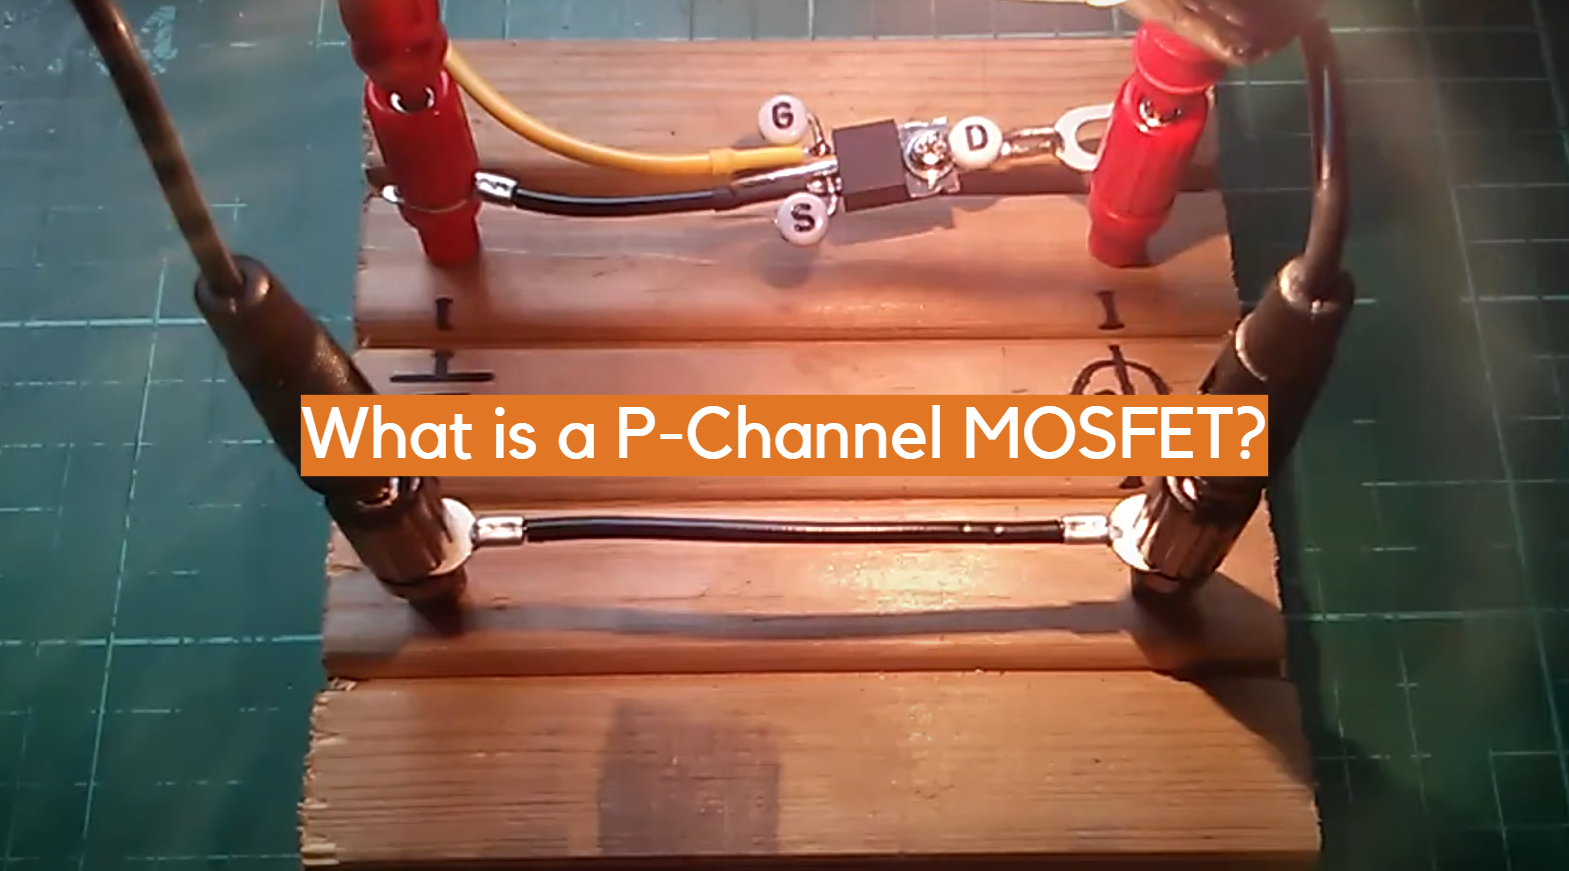 What is a P-Channel MOSFET?